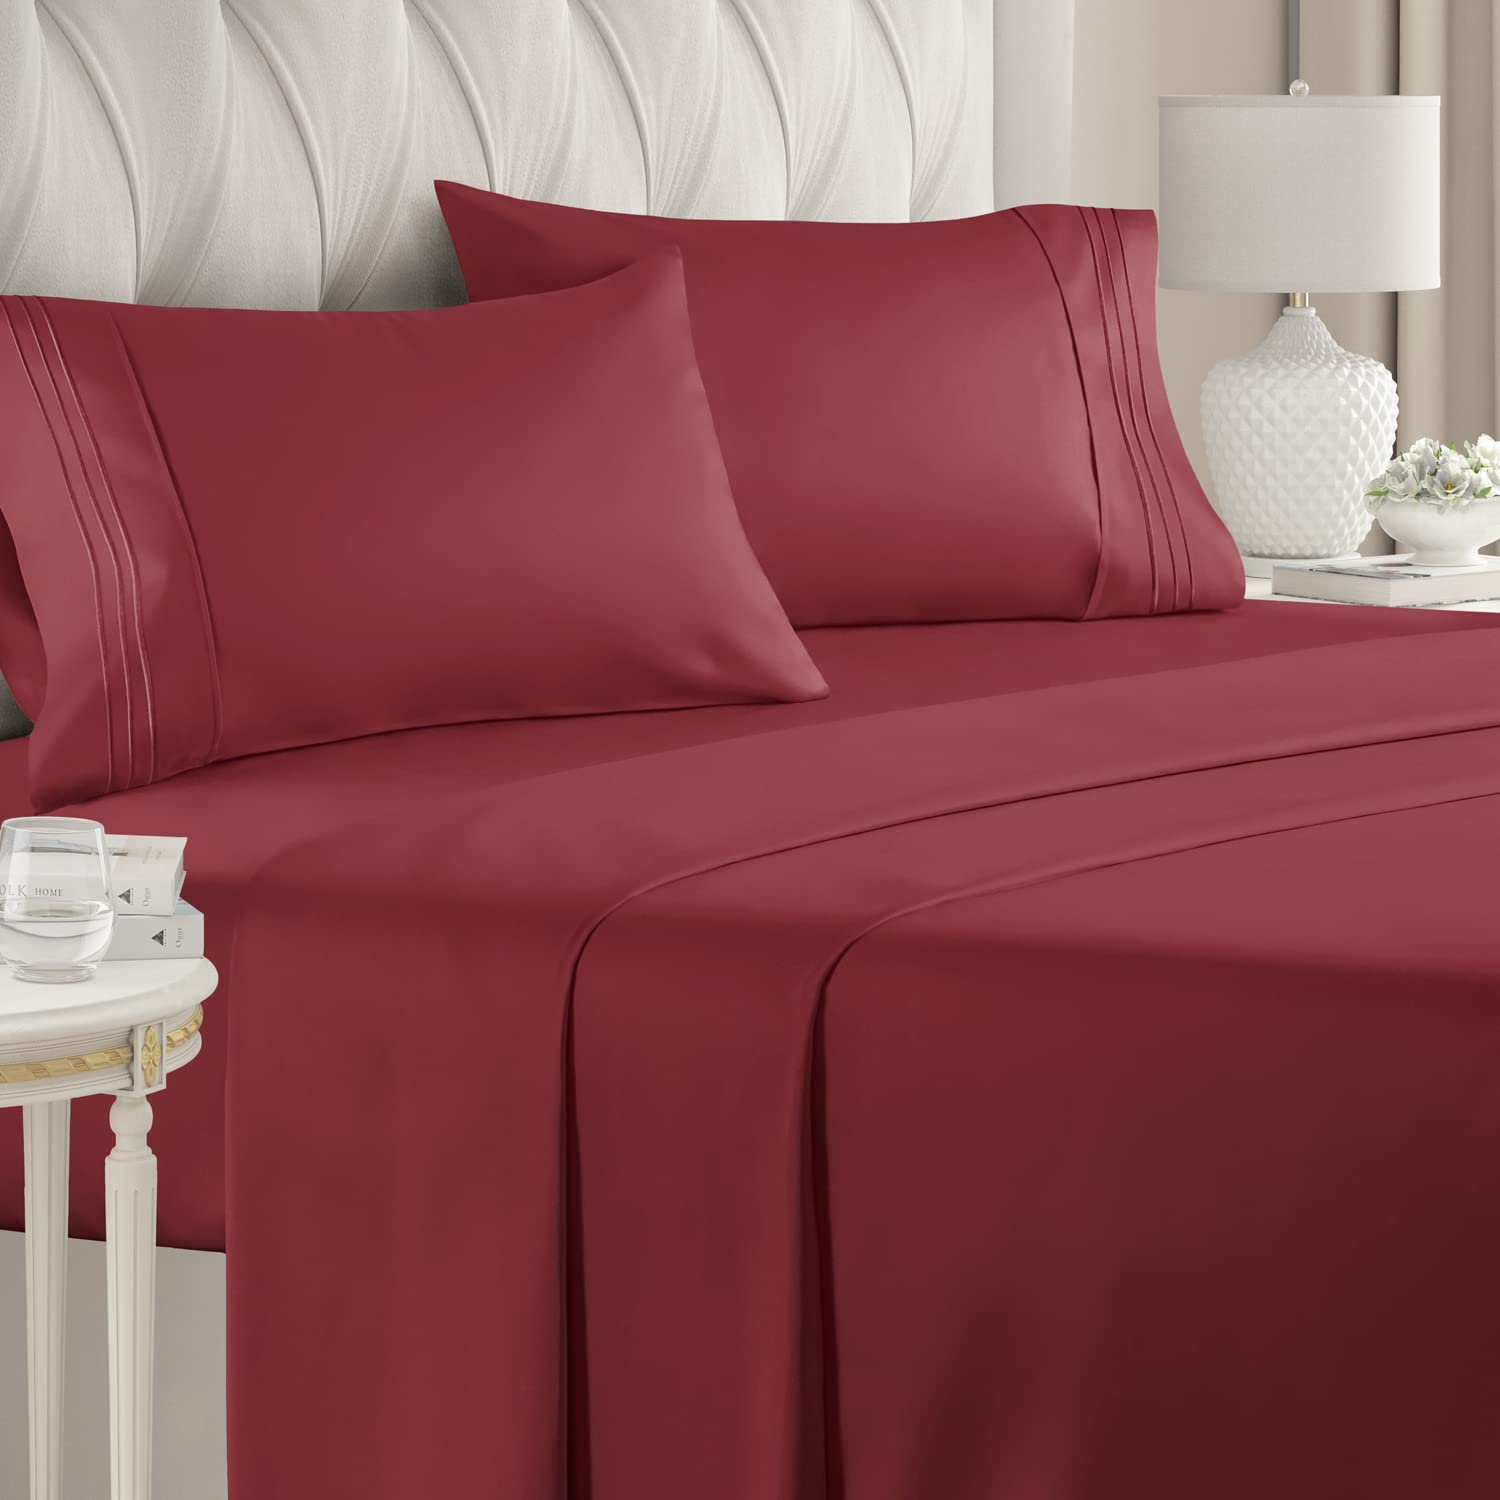 Buy 1000-TC Solid Sheet Set Burgundy Egyptian Cotton - FREE SHIPPING at- Egyptianhomelinens.com